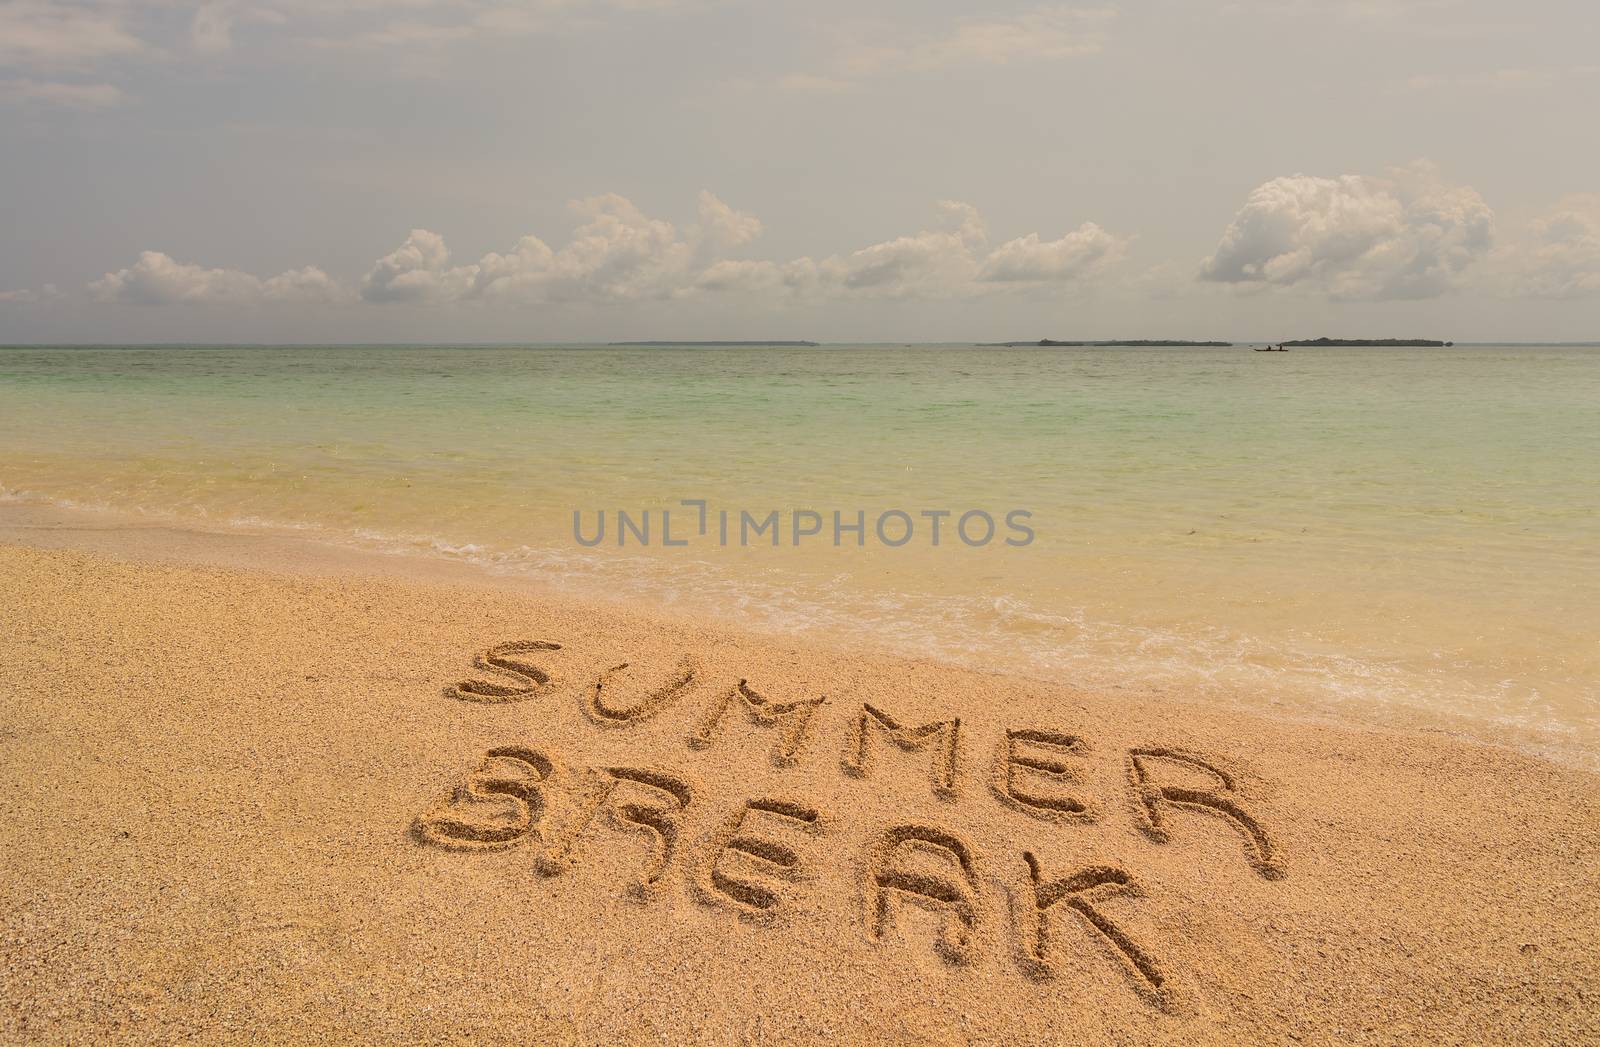 In the photo a beach in Zanzibar in the afternoon where there is an inscription on the sand "Summer Break".